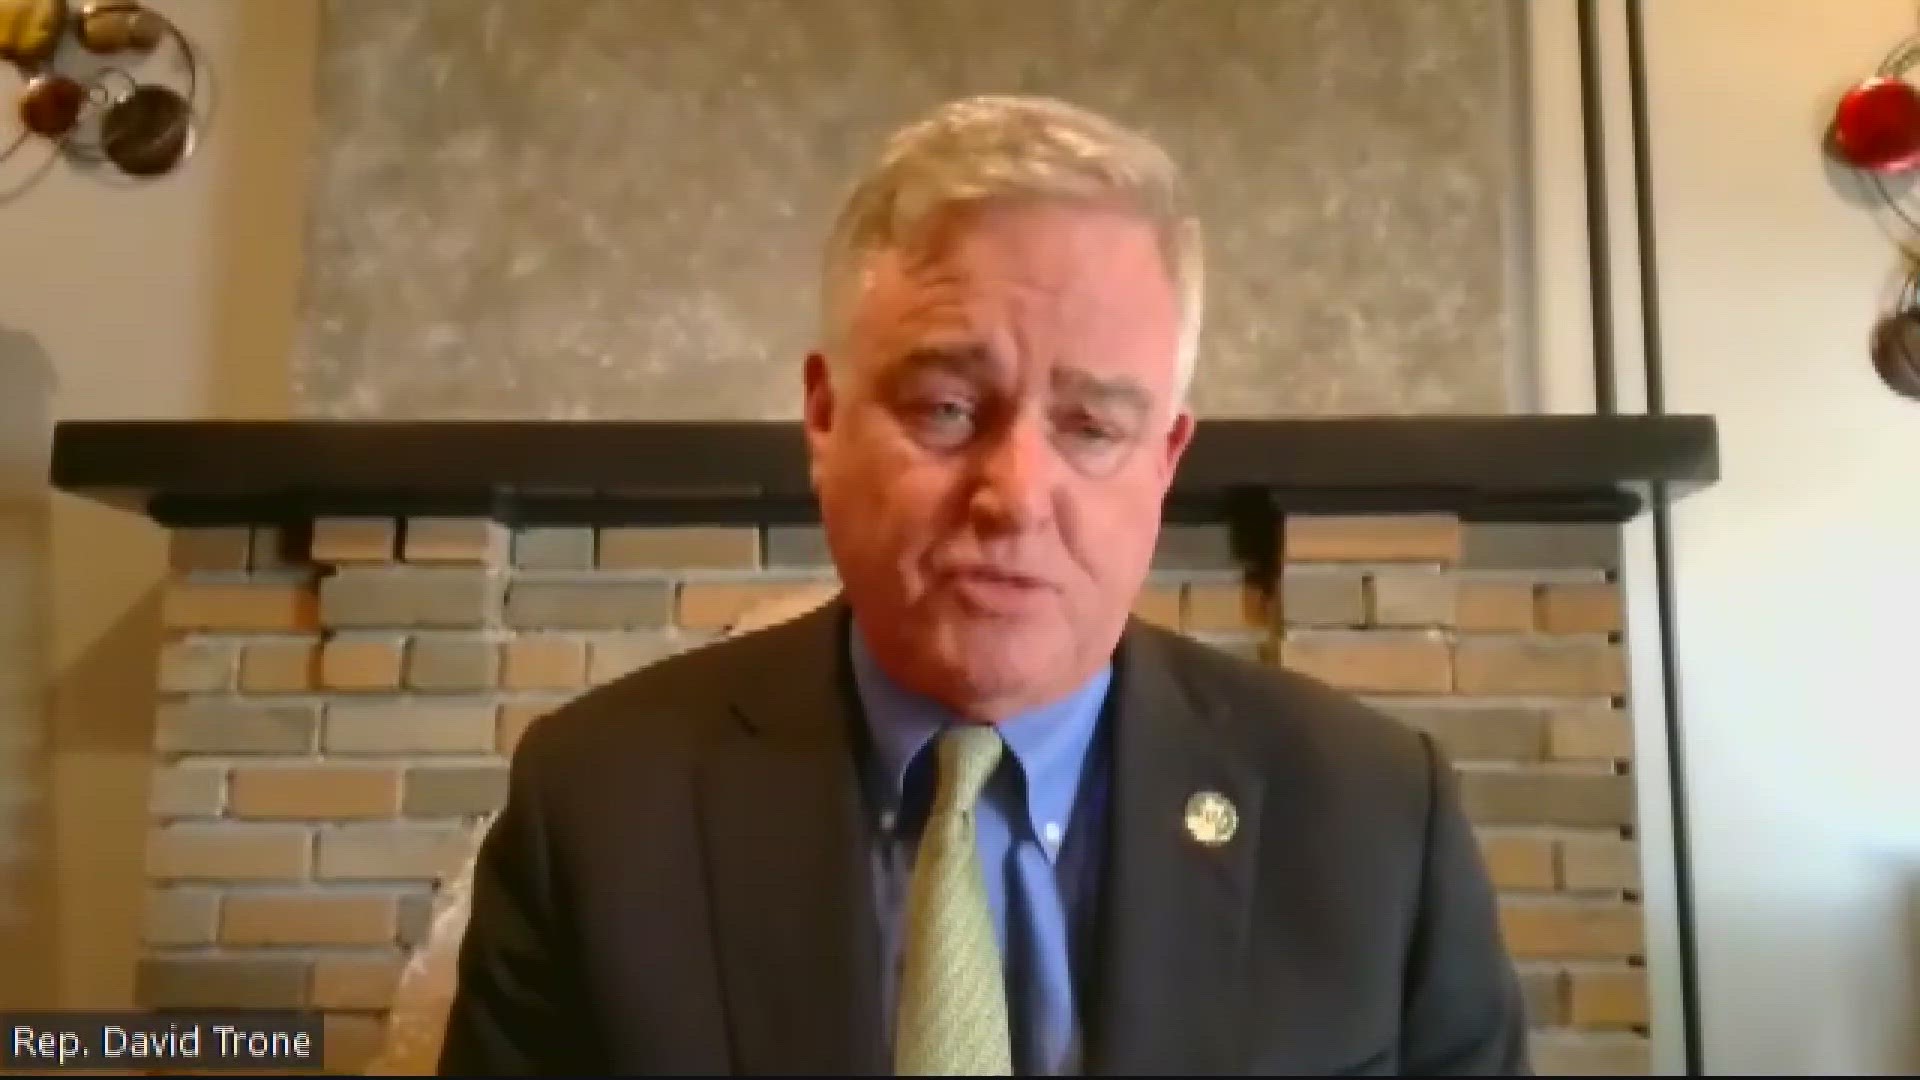 David Trone shares why he's running for Senate